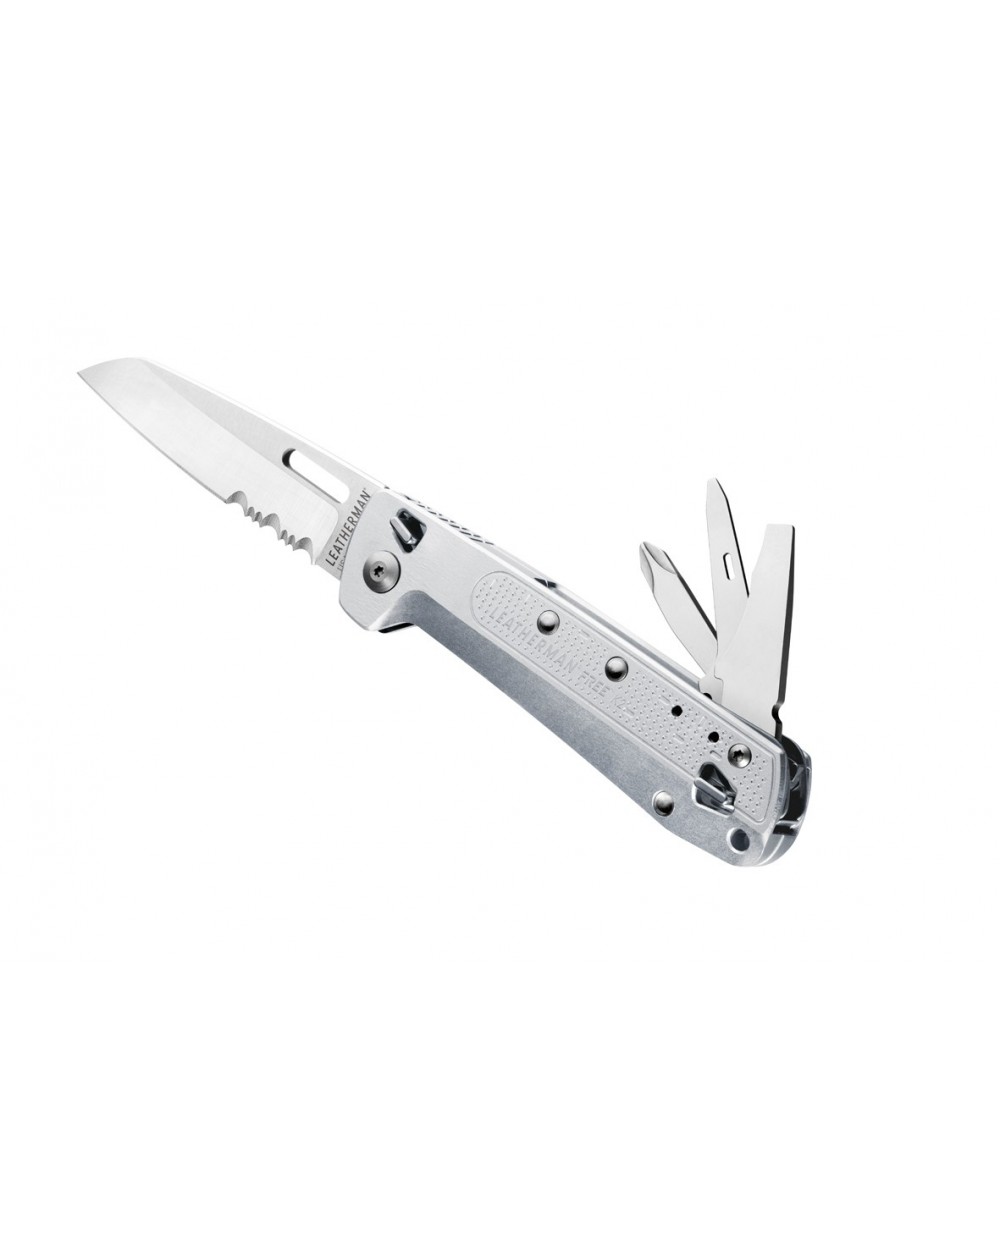 leatherman-pince-multifonctions-free-k2x-argent-832654-2